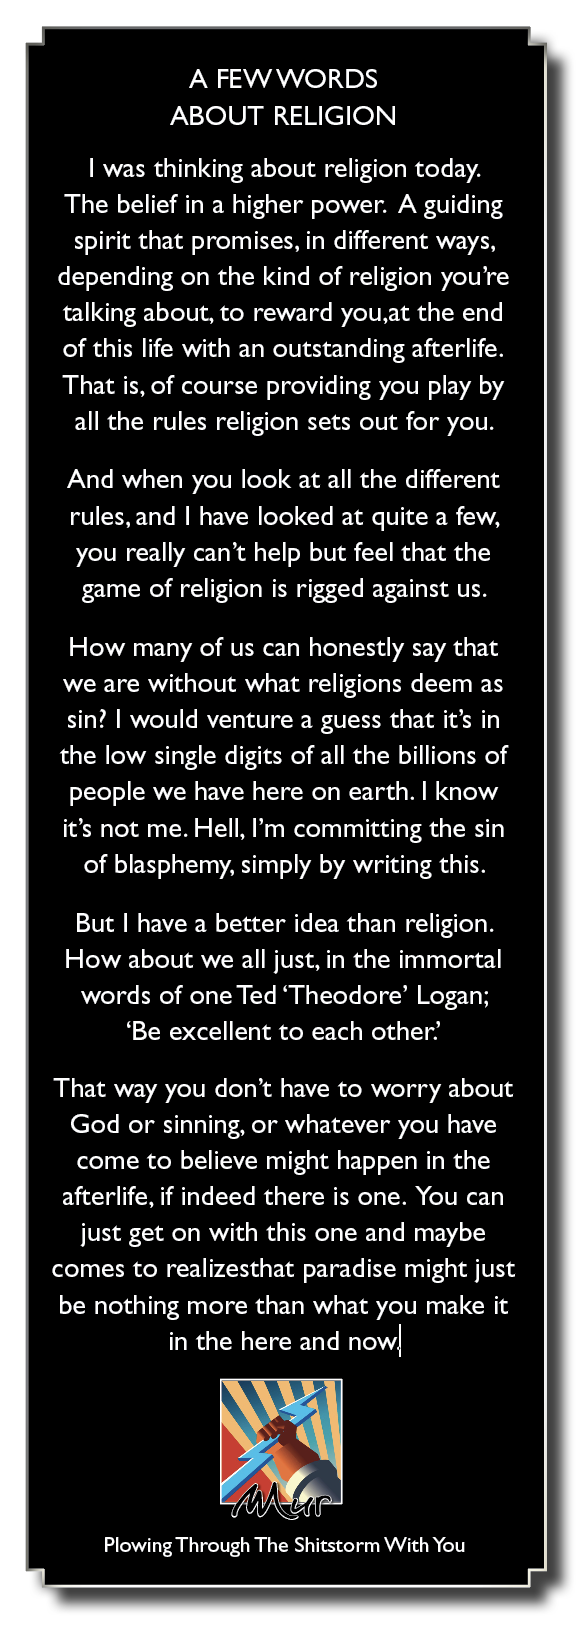 A FEW WORDS
ABOUT RELIGION

| was thinking about religion today.

The belief in a higher power. A guiding

spirit that promises, in different ways,
depending on the kind of religion you're
talking about, to reward you,at the end
of this life with an outstanding afterlife.
That is, of course providing you play by

all the rules religion sets out for you.

And when you look at all the different

rules, and | have looked at quite a few,
you really can’t help but feel that the

game of religion is rigged against us.

How many of us can honestly say that
we are without what religions deem as
sin? | would venture a guess that it's in
the low single digits of all the billions of
people we have here on earth. | know
it's not me. Hell, I'm committing the sin
of blasphemy, simply by writing this.

But | have a better idea than religion.
How about we all just, in the immortal
words of one Ted ‘Theodore’ Logan;
‘Be excellent to each other’

That way you don't have to worry about
God or sinning, or whatever you have
come to believe might happen in the

afterlife, if indeed there is one. You can
just get on with this one and maybe
comes to realizesthat paradise might just
be nothing more than what you make it
in the here and now]

4

PEMA

[ALC RL Een on